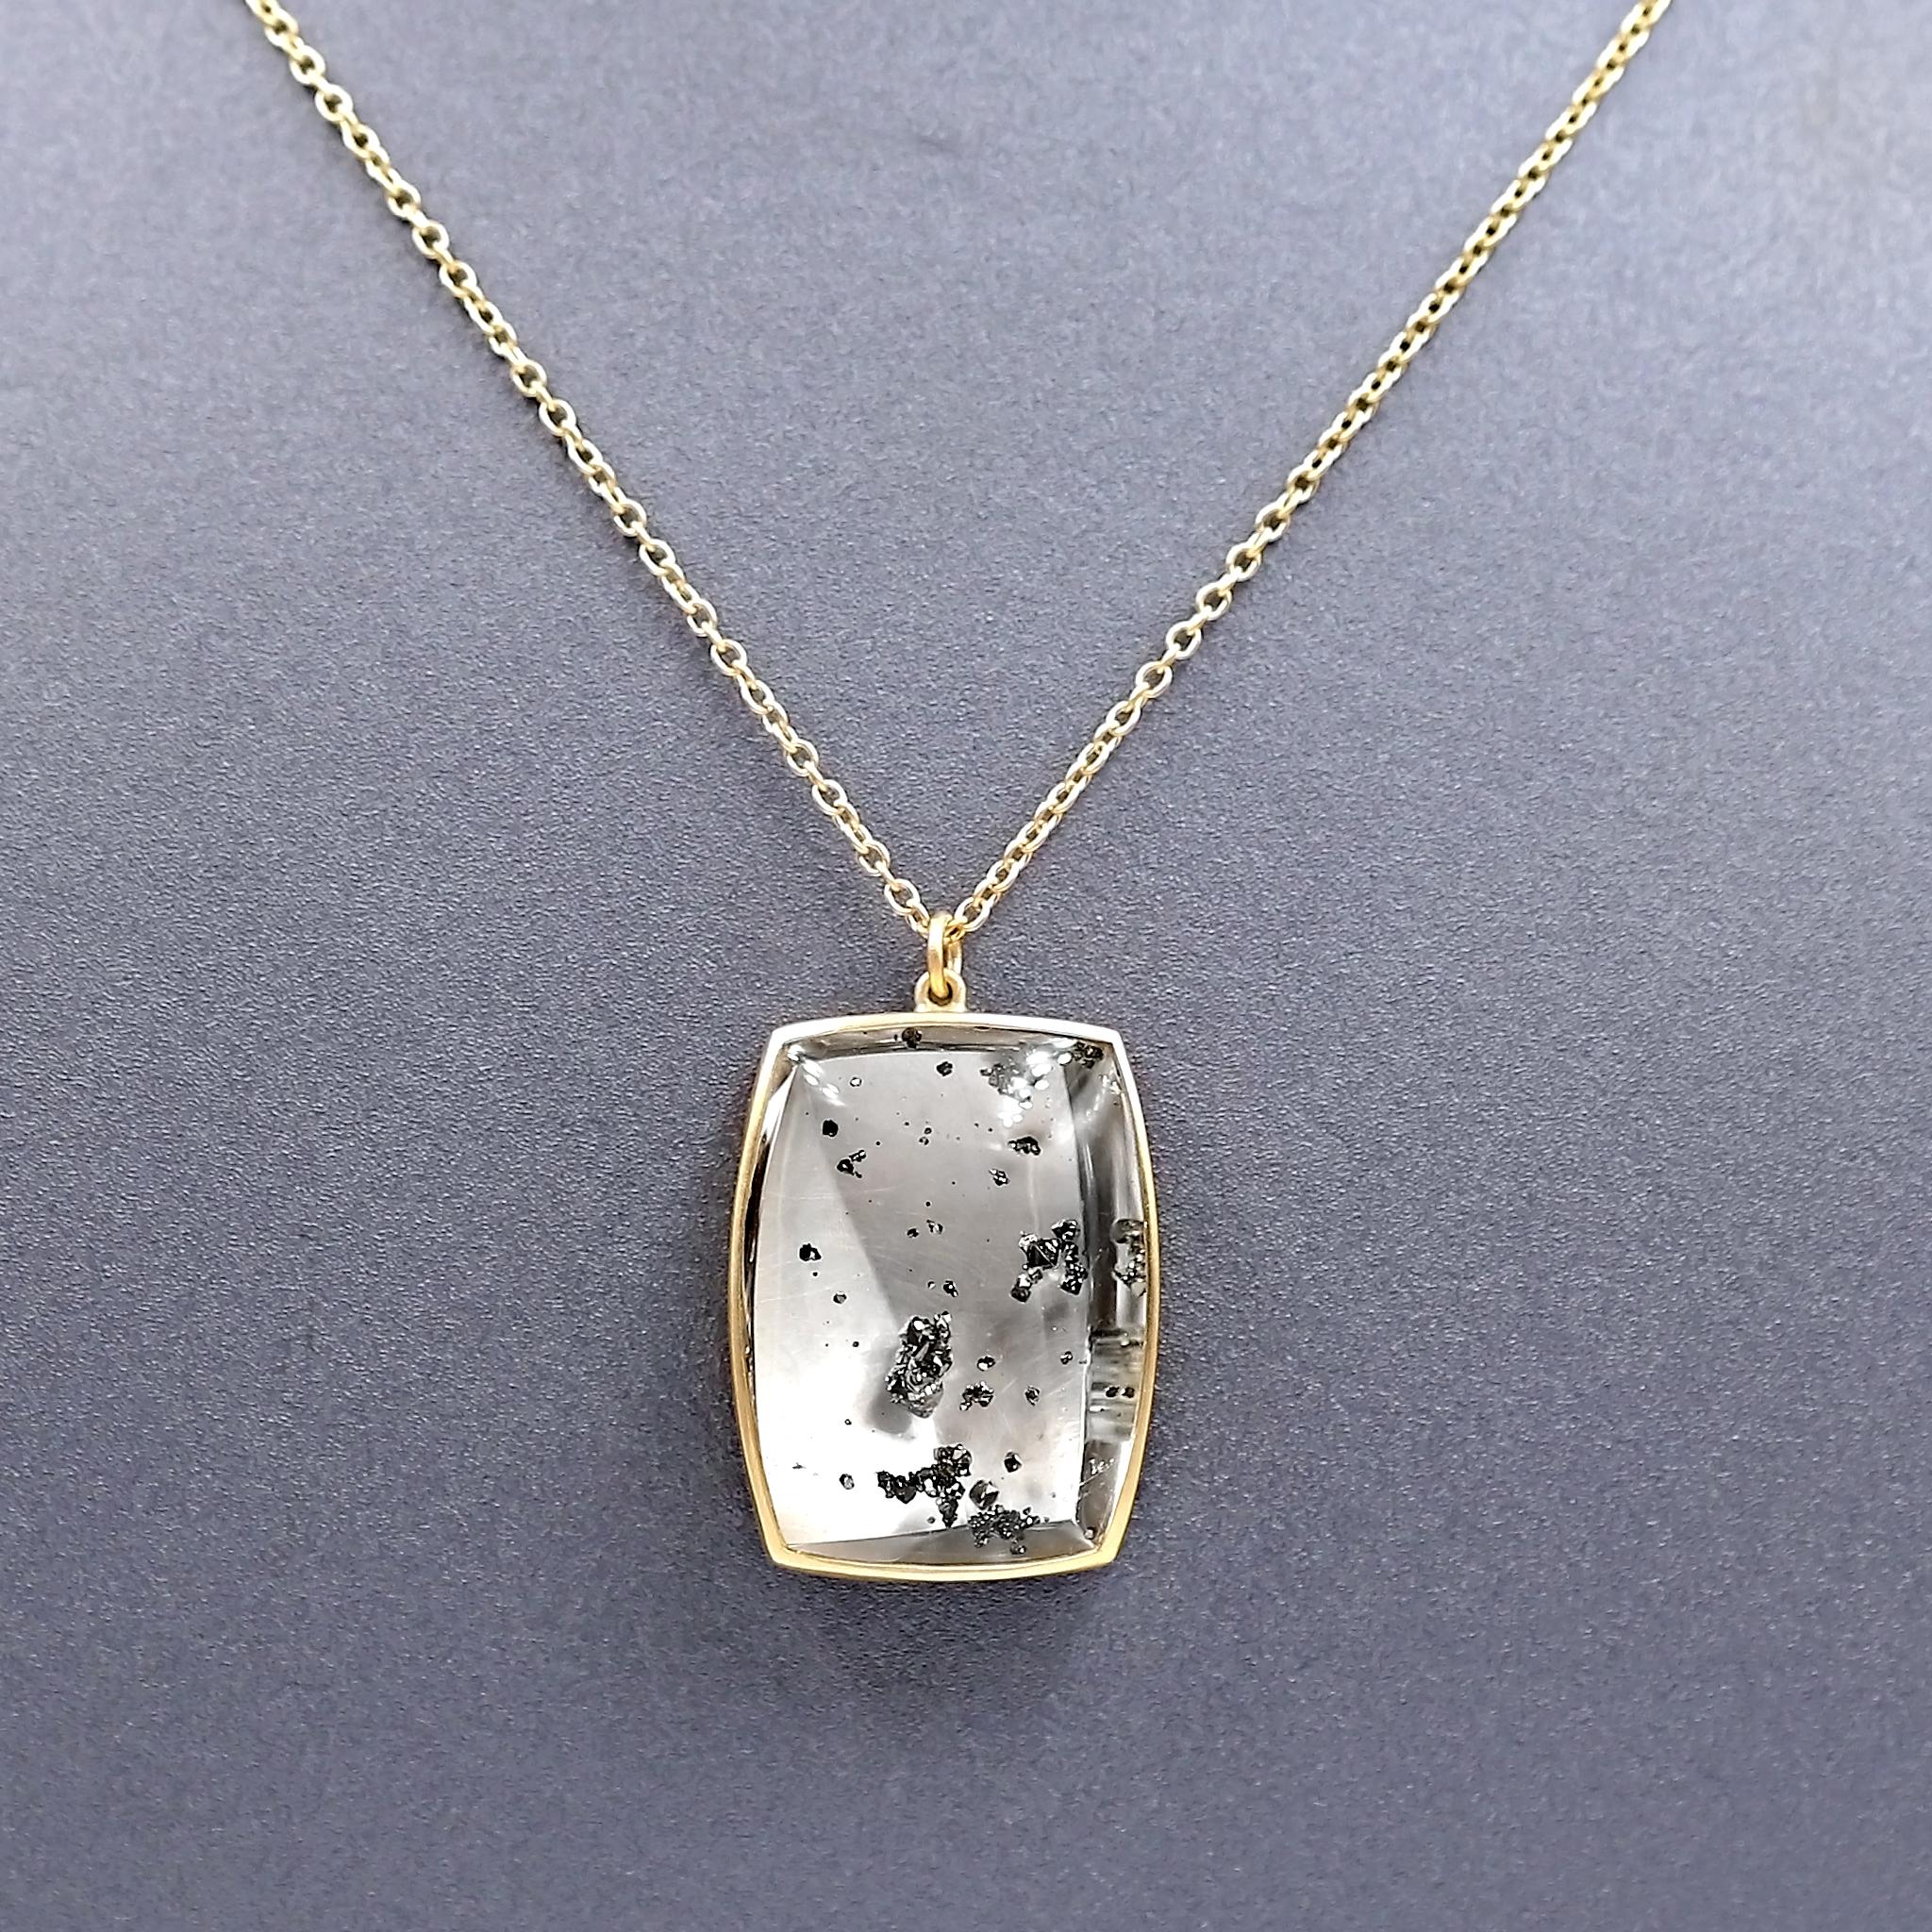 One of a Kind Necklace hand-fabricated by jewelry maker Lola Brooks featuring a remarkable, unusual 45.67 carat quartz cabochon that showcases a vibrant, three dimensional array of shimmering natural pyrite crystals. The phenomenal gem is bezel-set